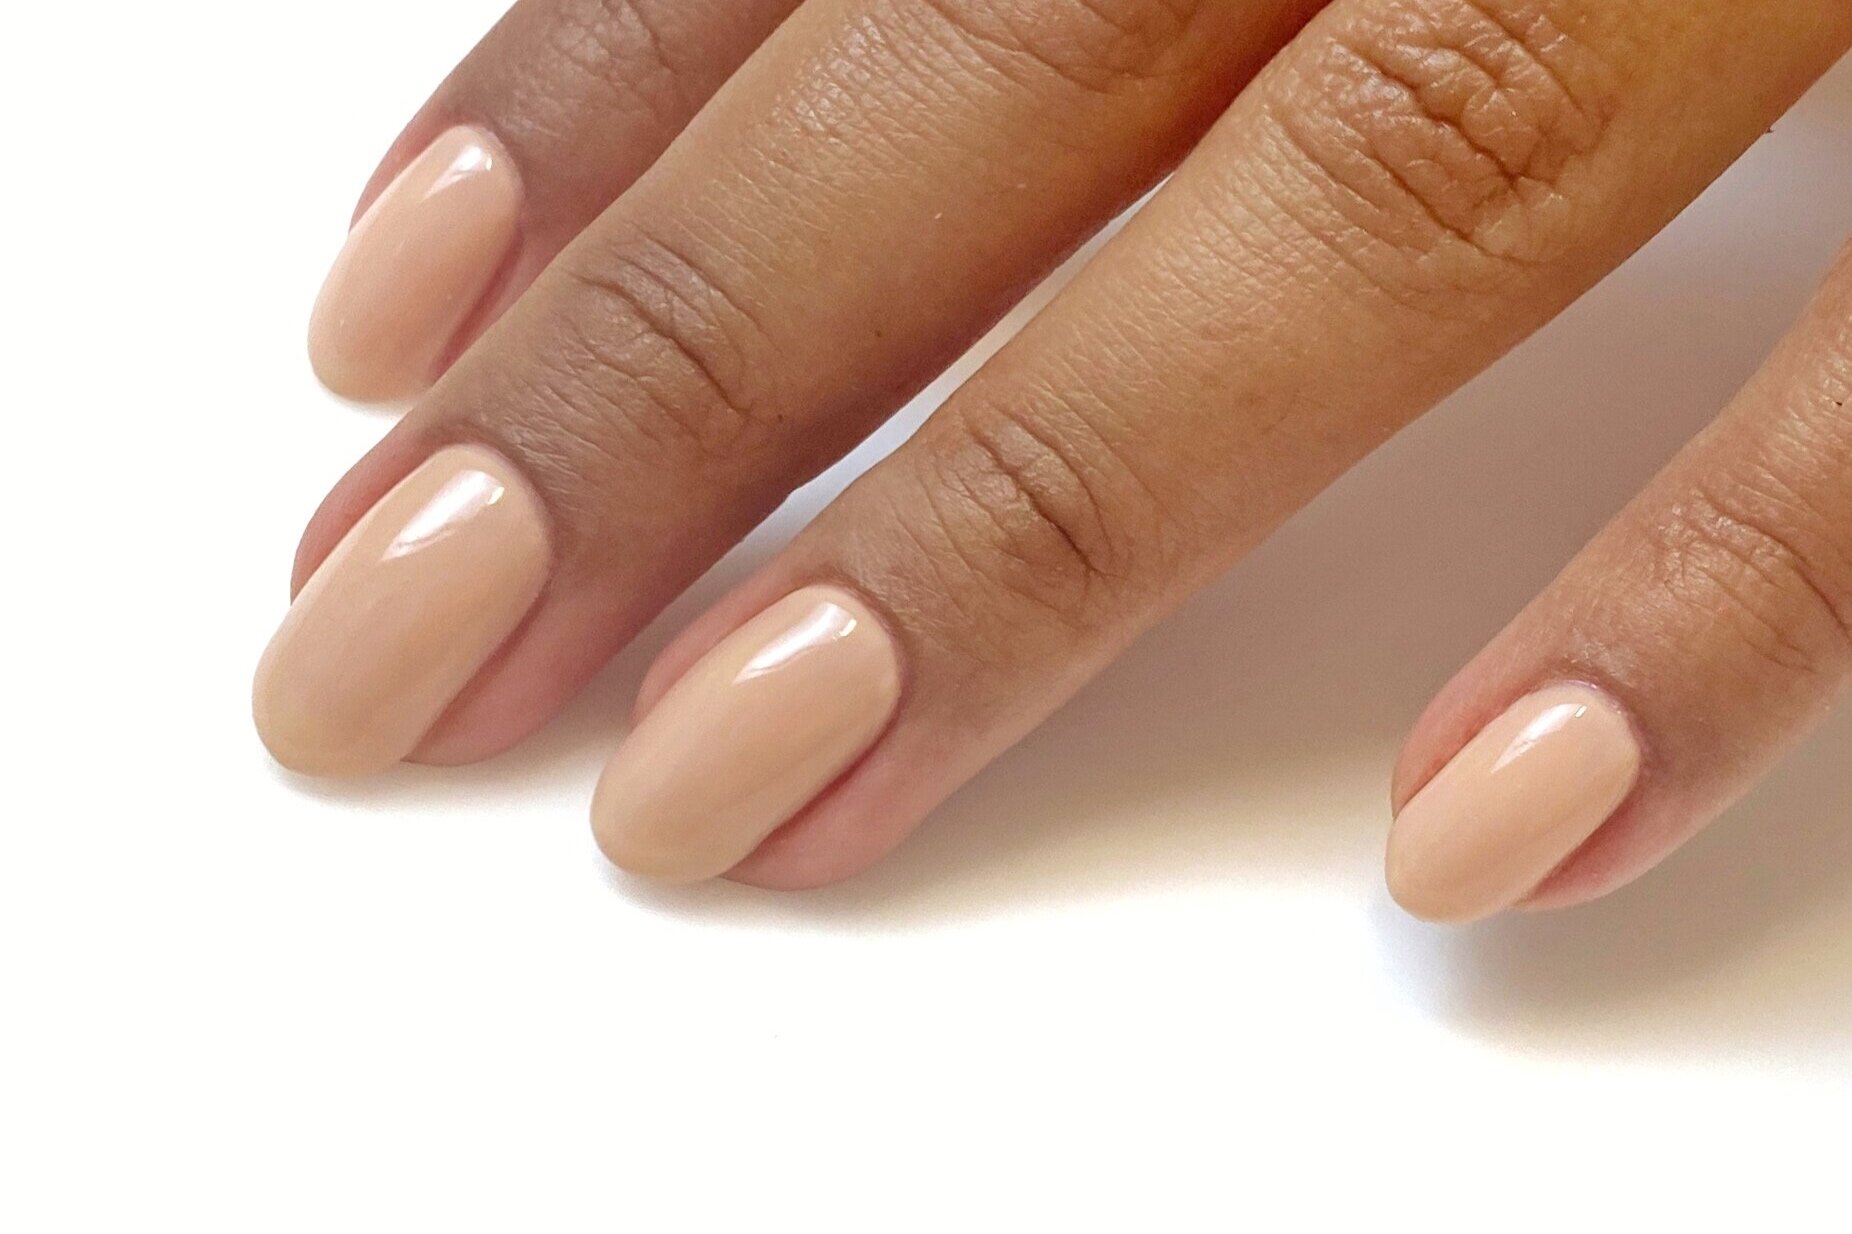 How To Keep Your Nails Healthy | Nails, February nails, Nail health